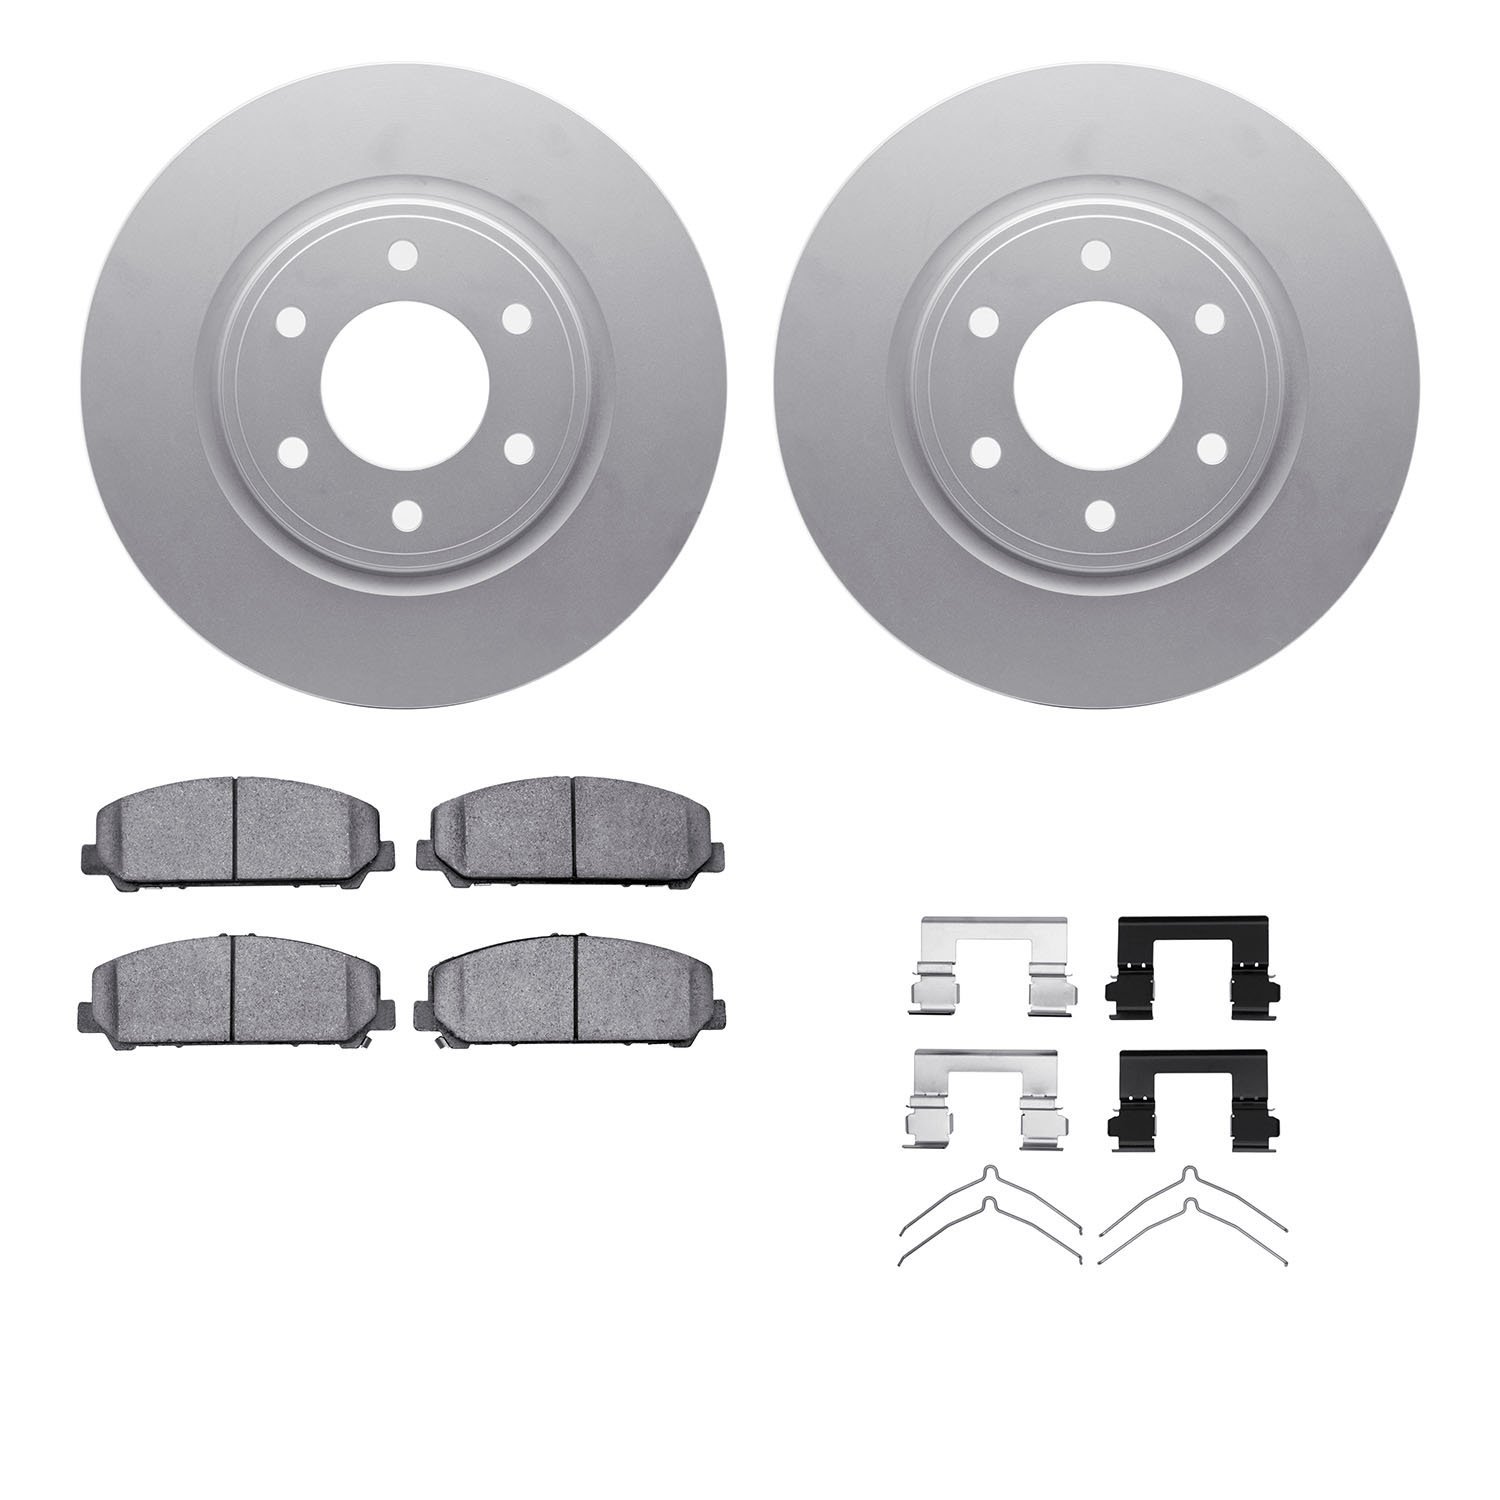 4412-68001 Geospec Brake Rotors with Ultimate-Duty Brake Pads & Hardware, Fits Select Infiniti/Nissan, Position: Front